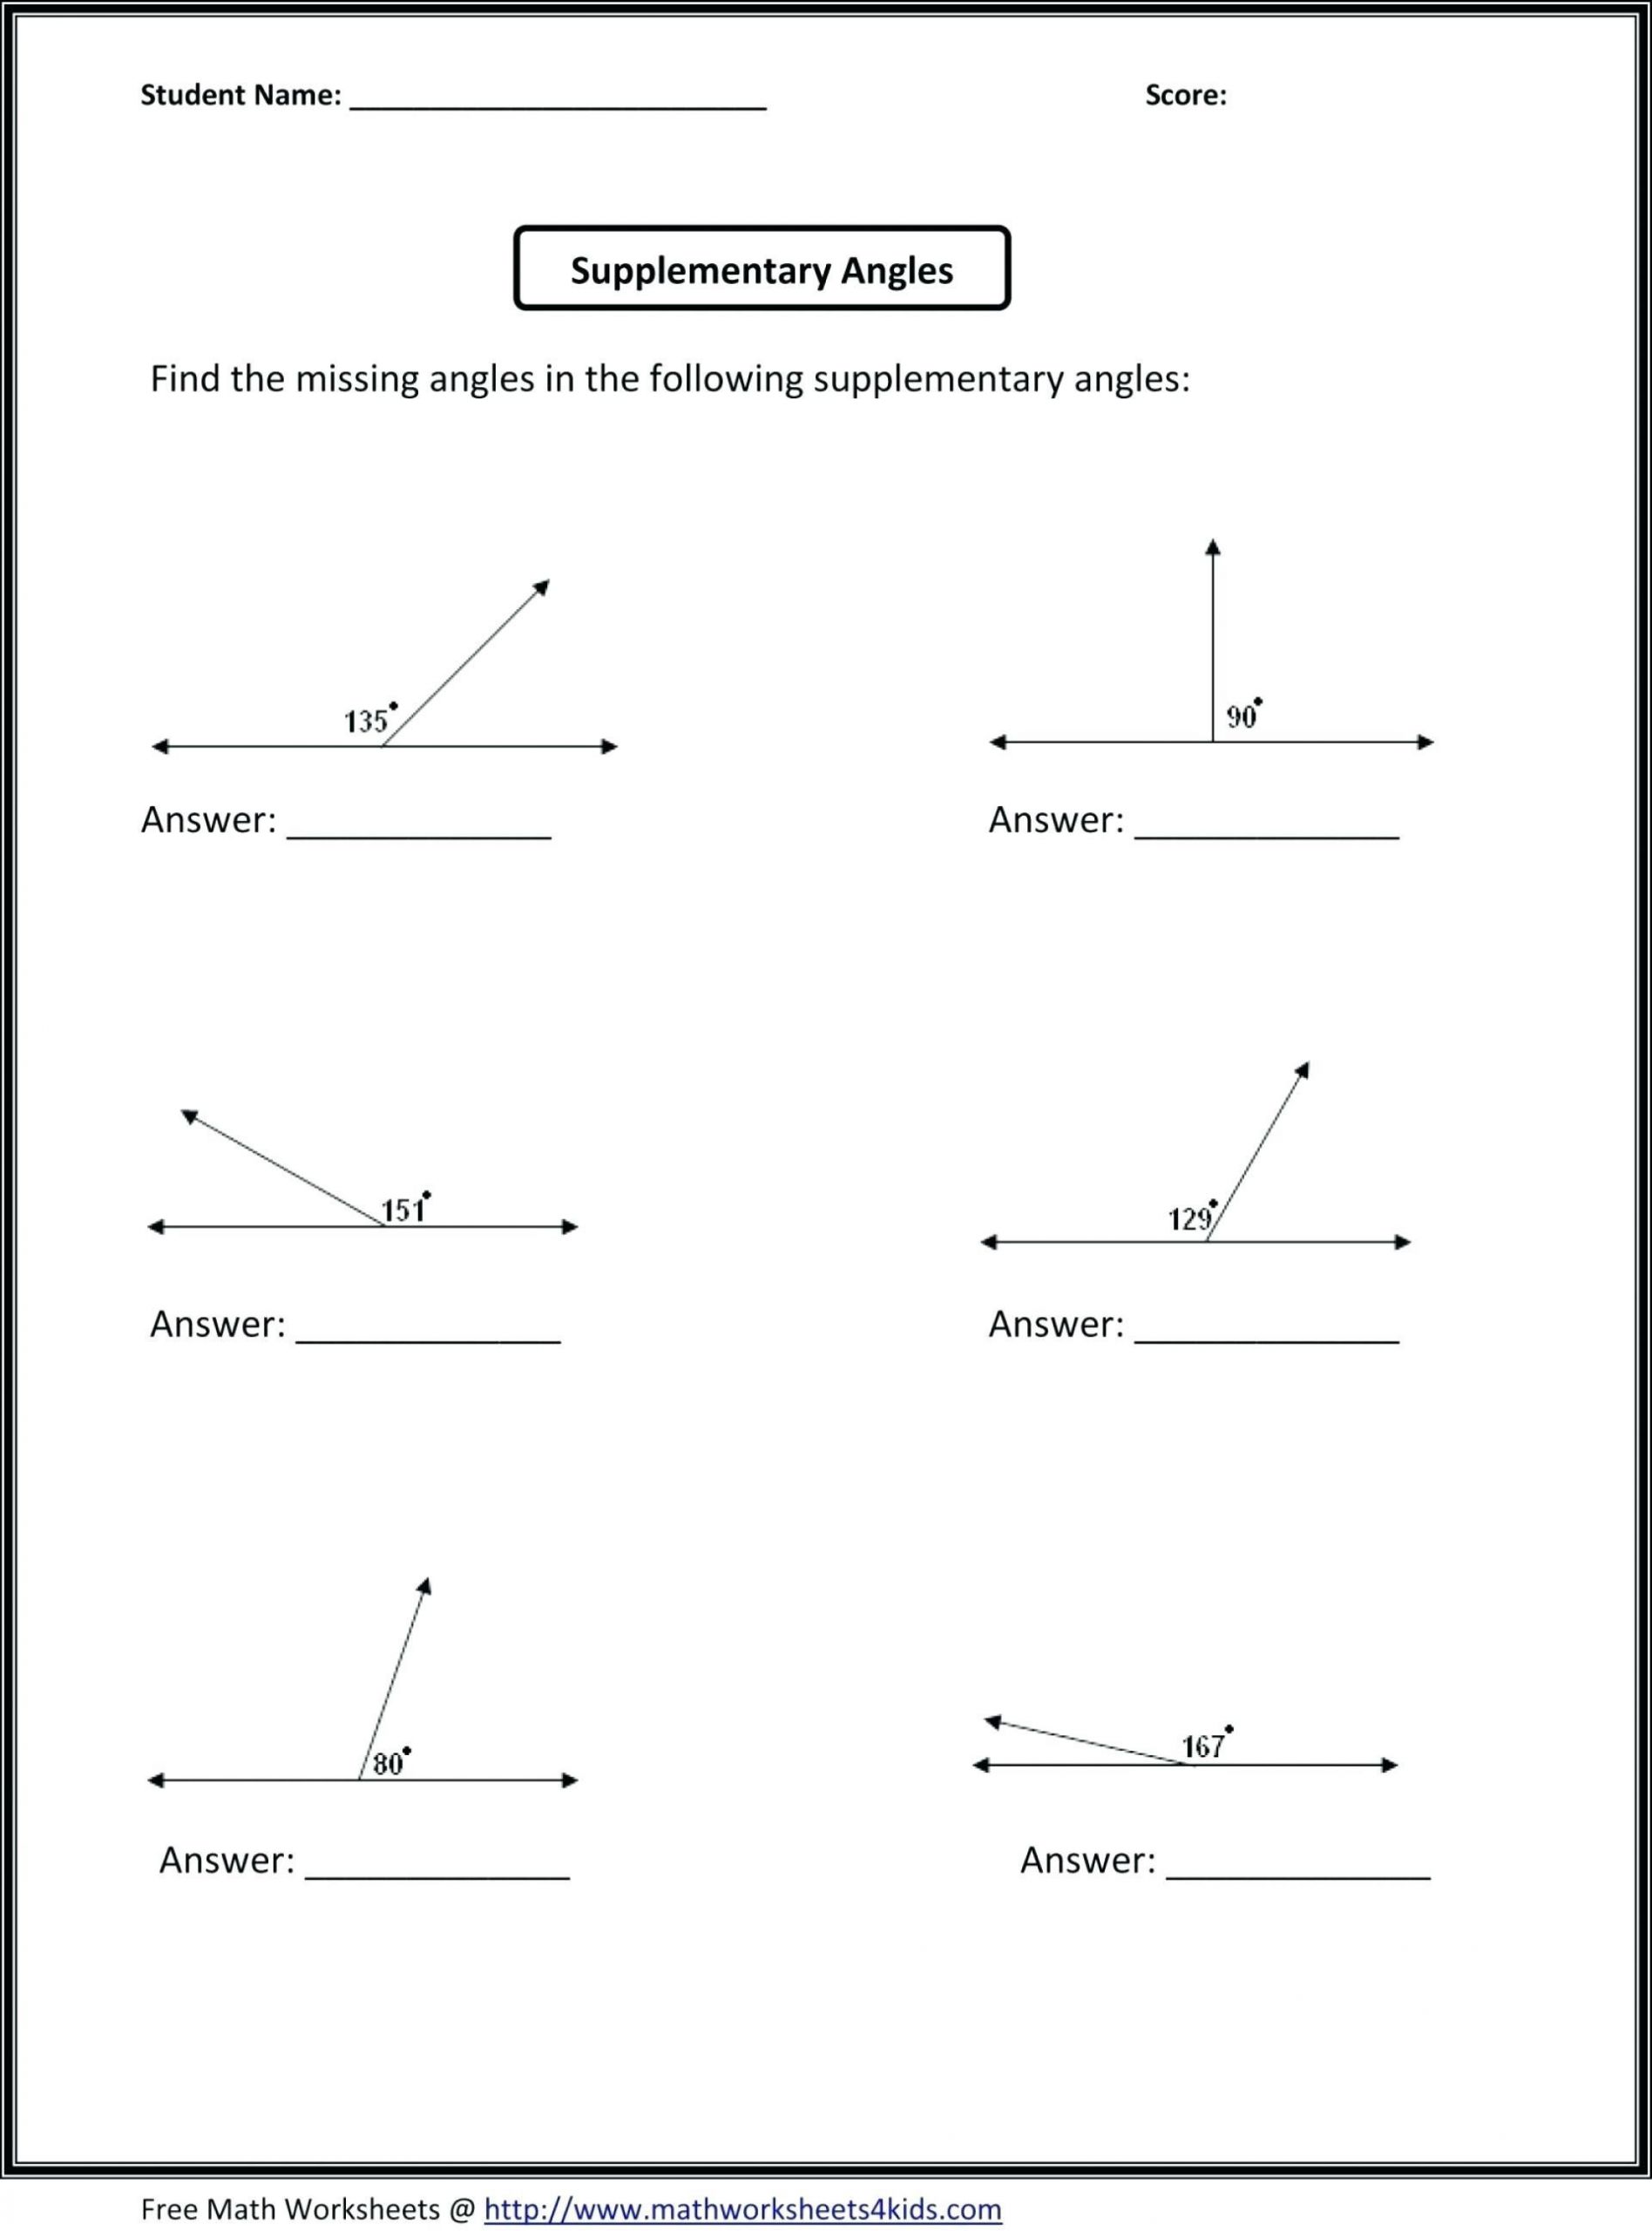 Free Math Worksheets Second Grade 2 Place Value Rounding Round 3 Digit Numbers Nearest 100